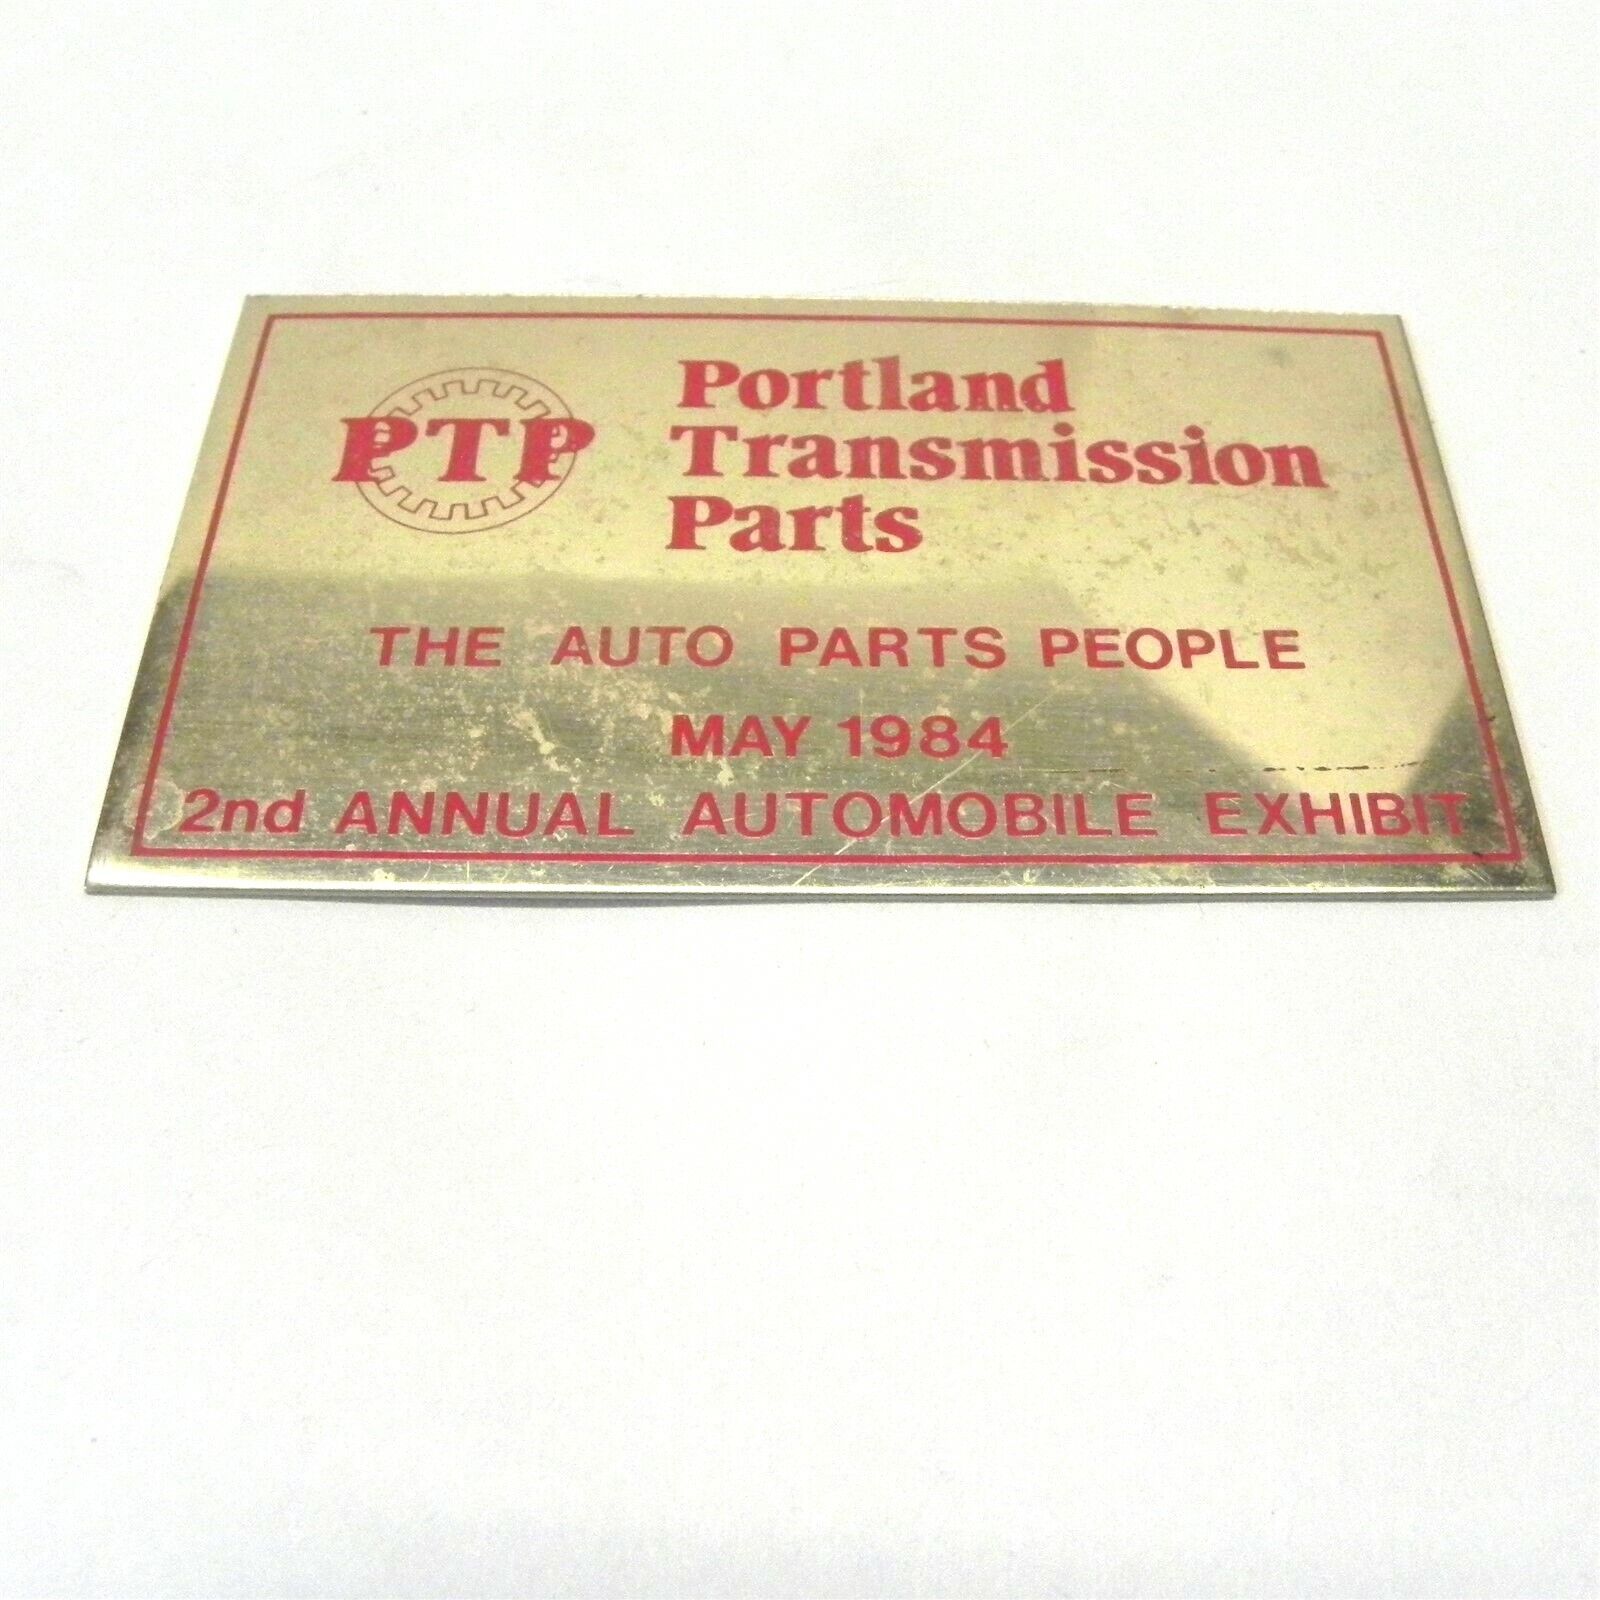 PTP PORTLAND TRANSMISSION PARTS THE AUTO PARTS PEOPLE SIGN PLAQUE SMALL 1984 MAY